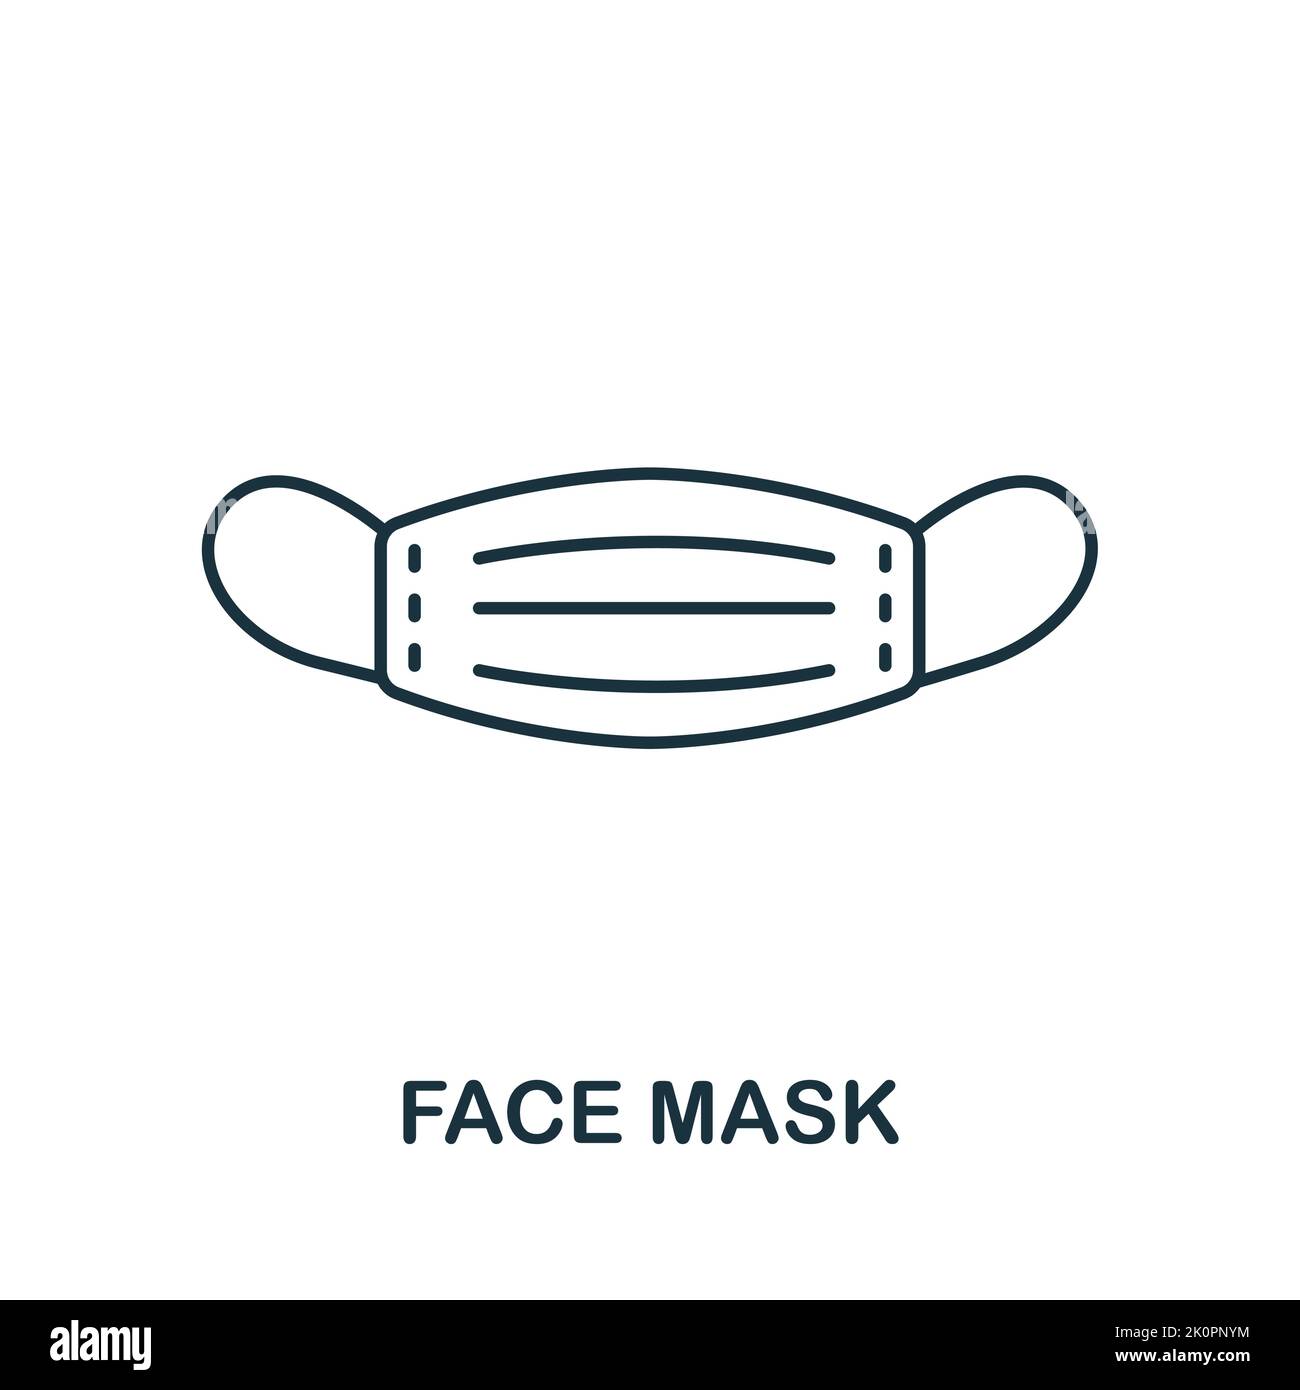 Face Mask icon. Monocrome element from medical services collection. Face Mask icon for banners, infographics and templates. Stock Vector